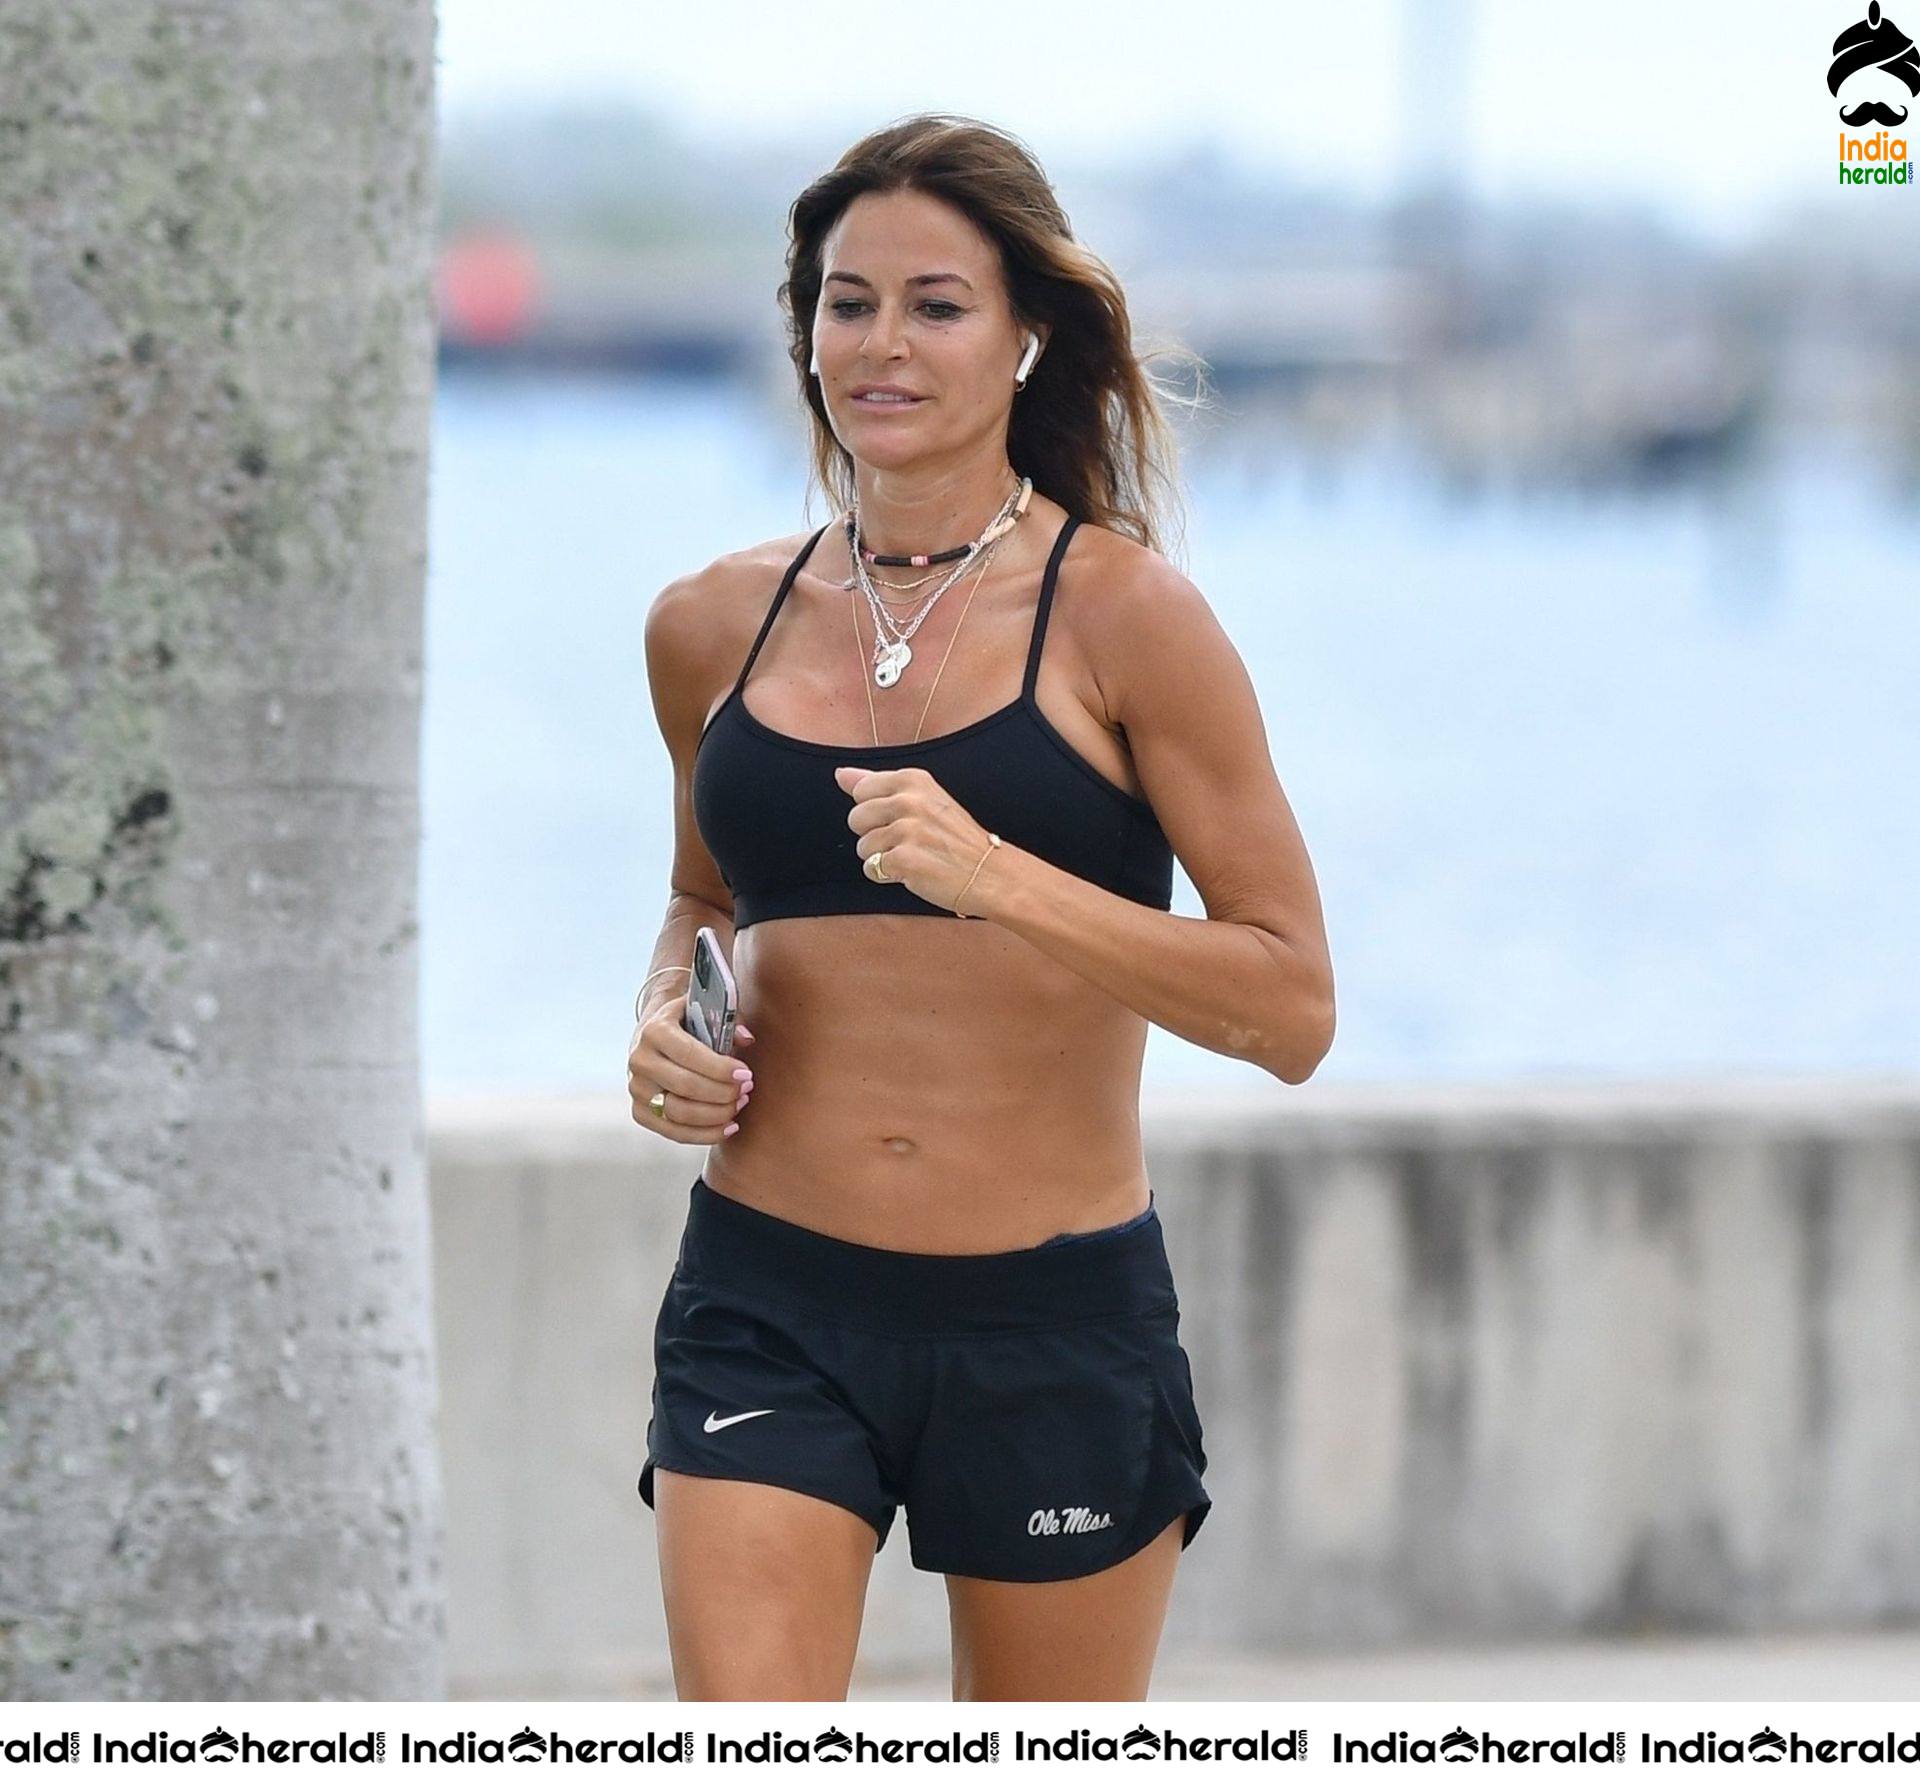 Kelly Bensimon goes for a morning run during the lockdown in Palm Beach